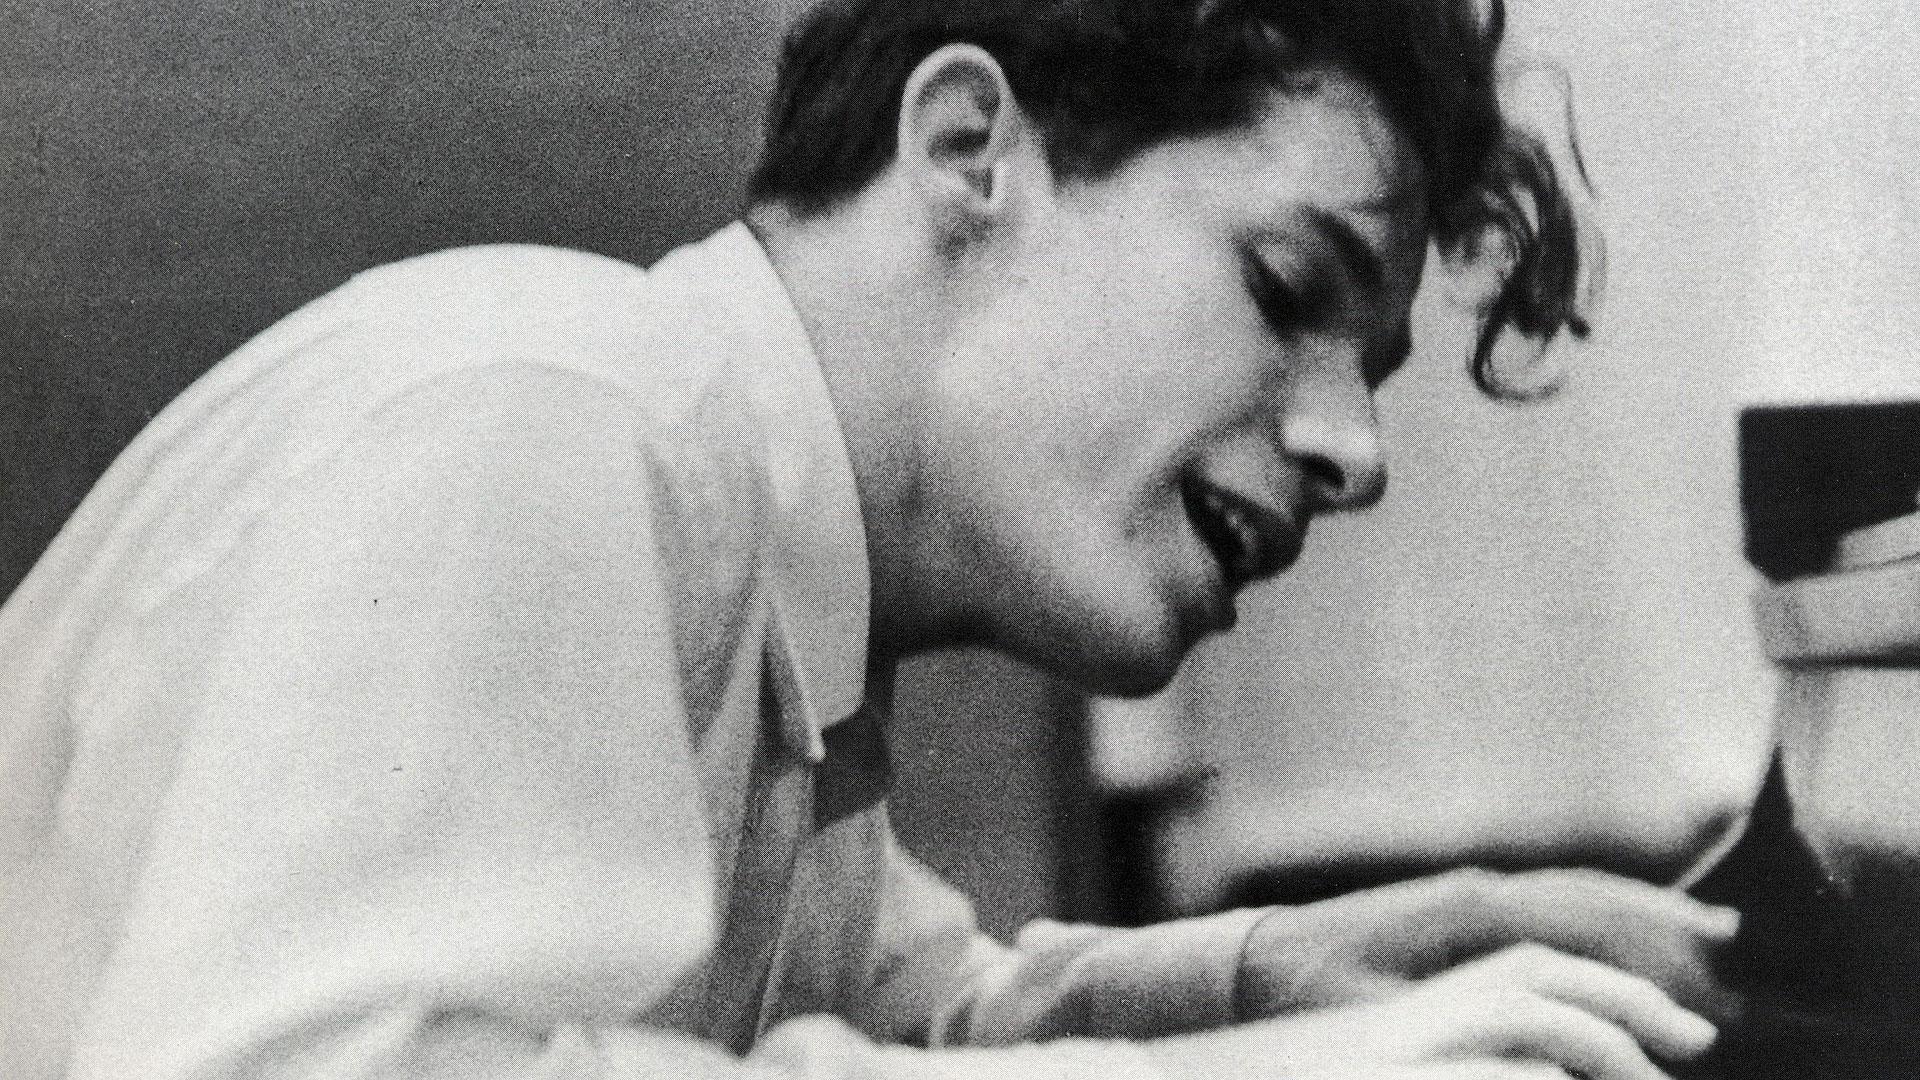 Genius Within: The Inner Life of Glenn Gould wgteh8f